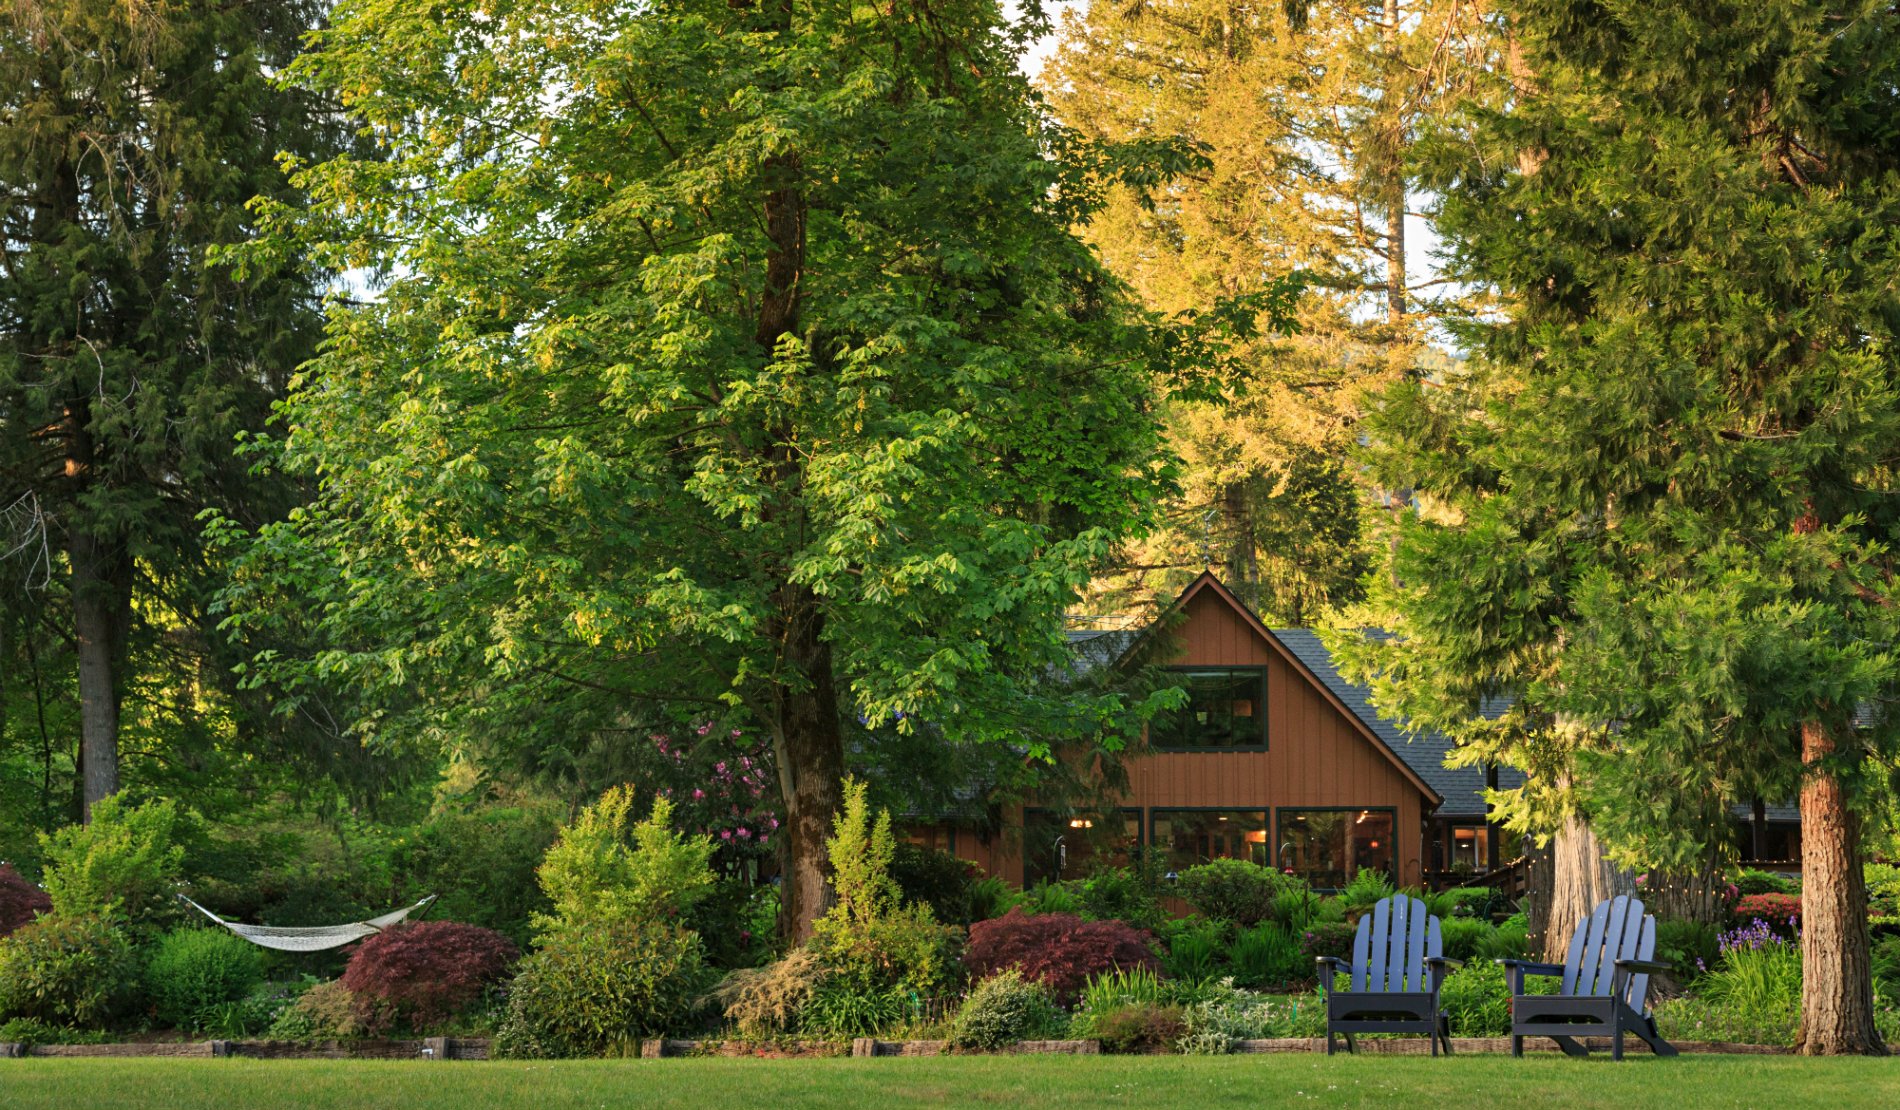 The lodge nestled amongst lush green trees and bushes with two Adirondack chairs in the grass.